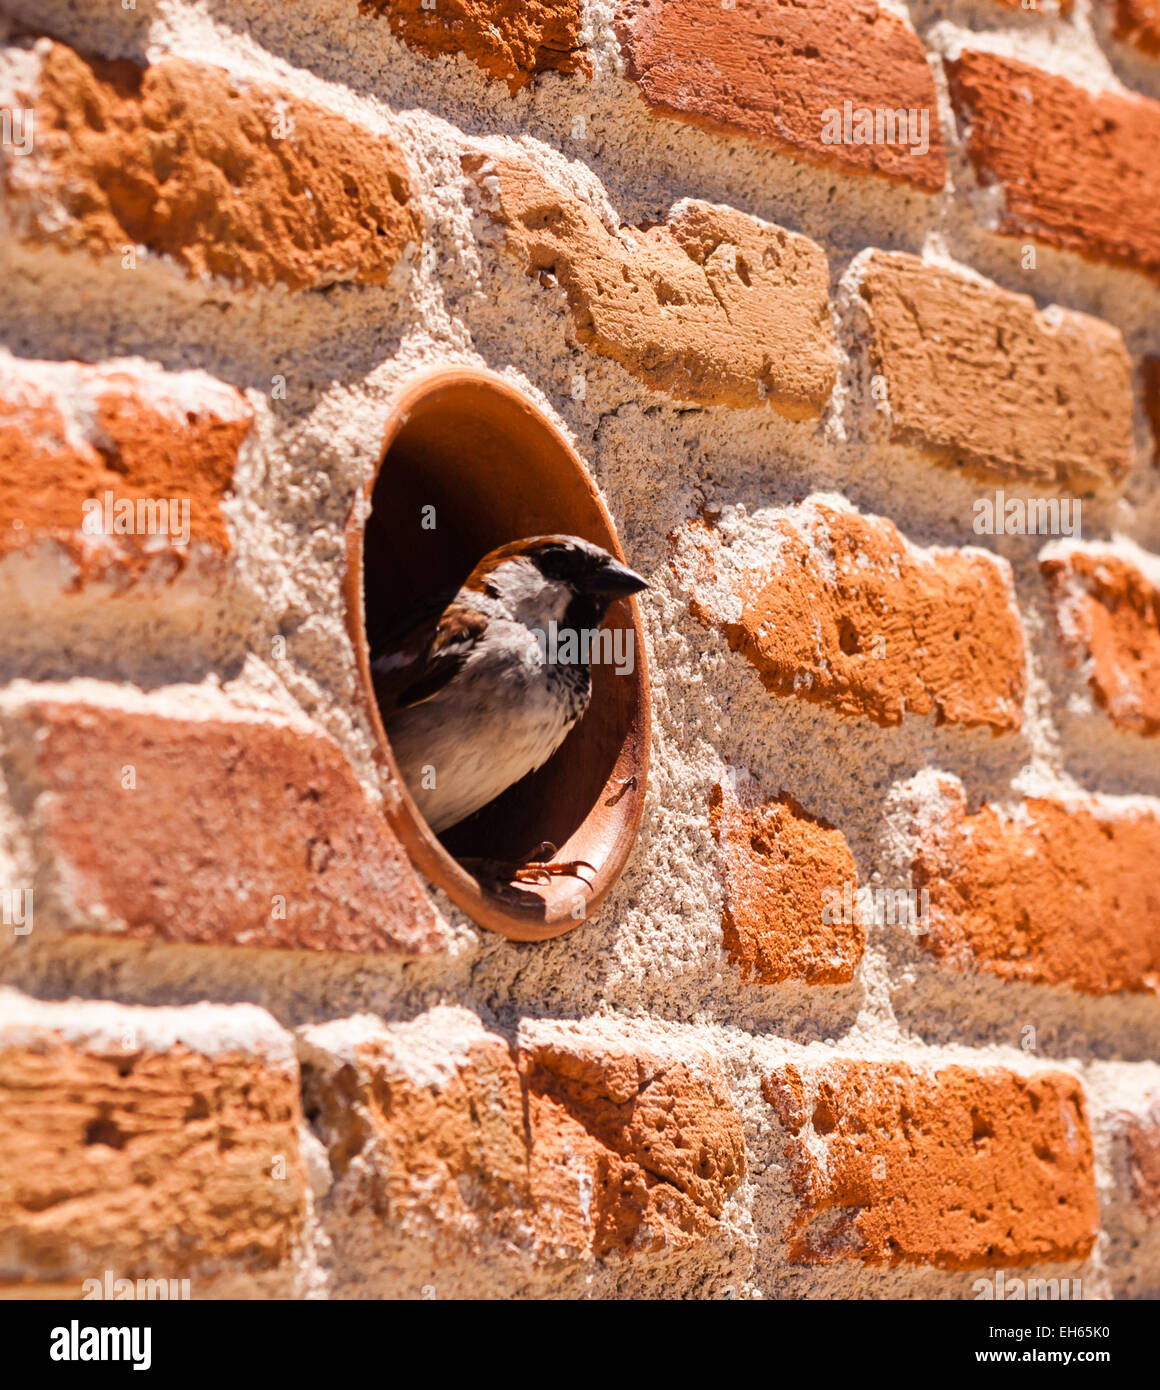 Bird standing in circular hole in red brick and mortar wall. Stock Photo